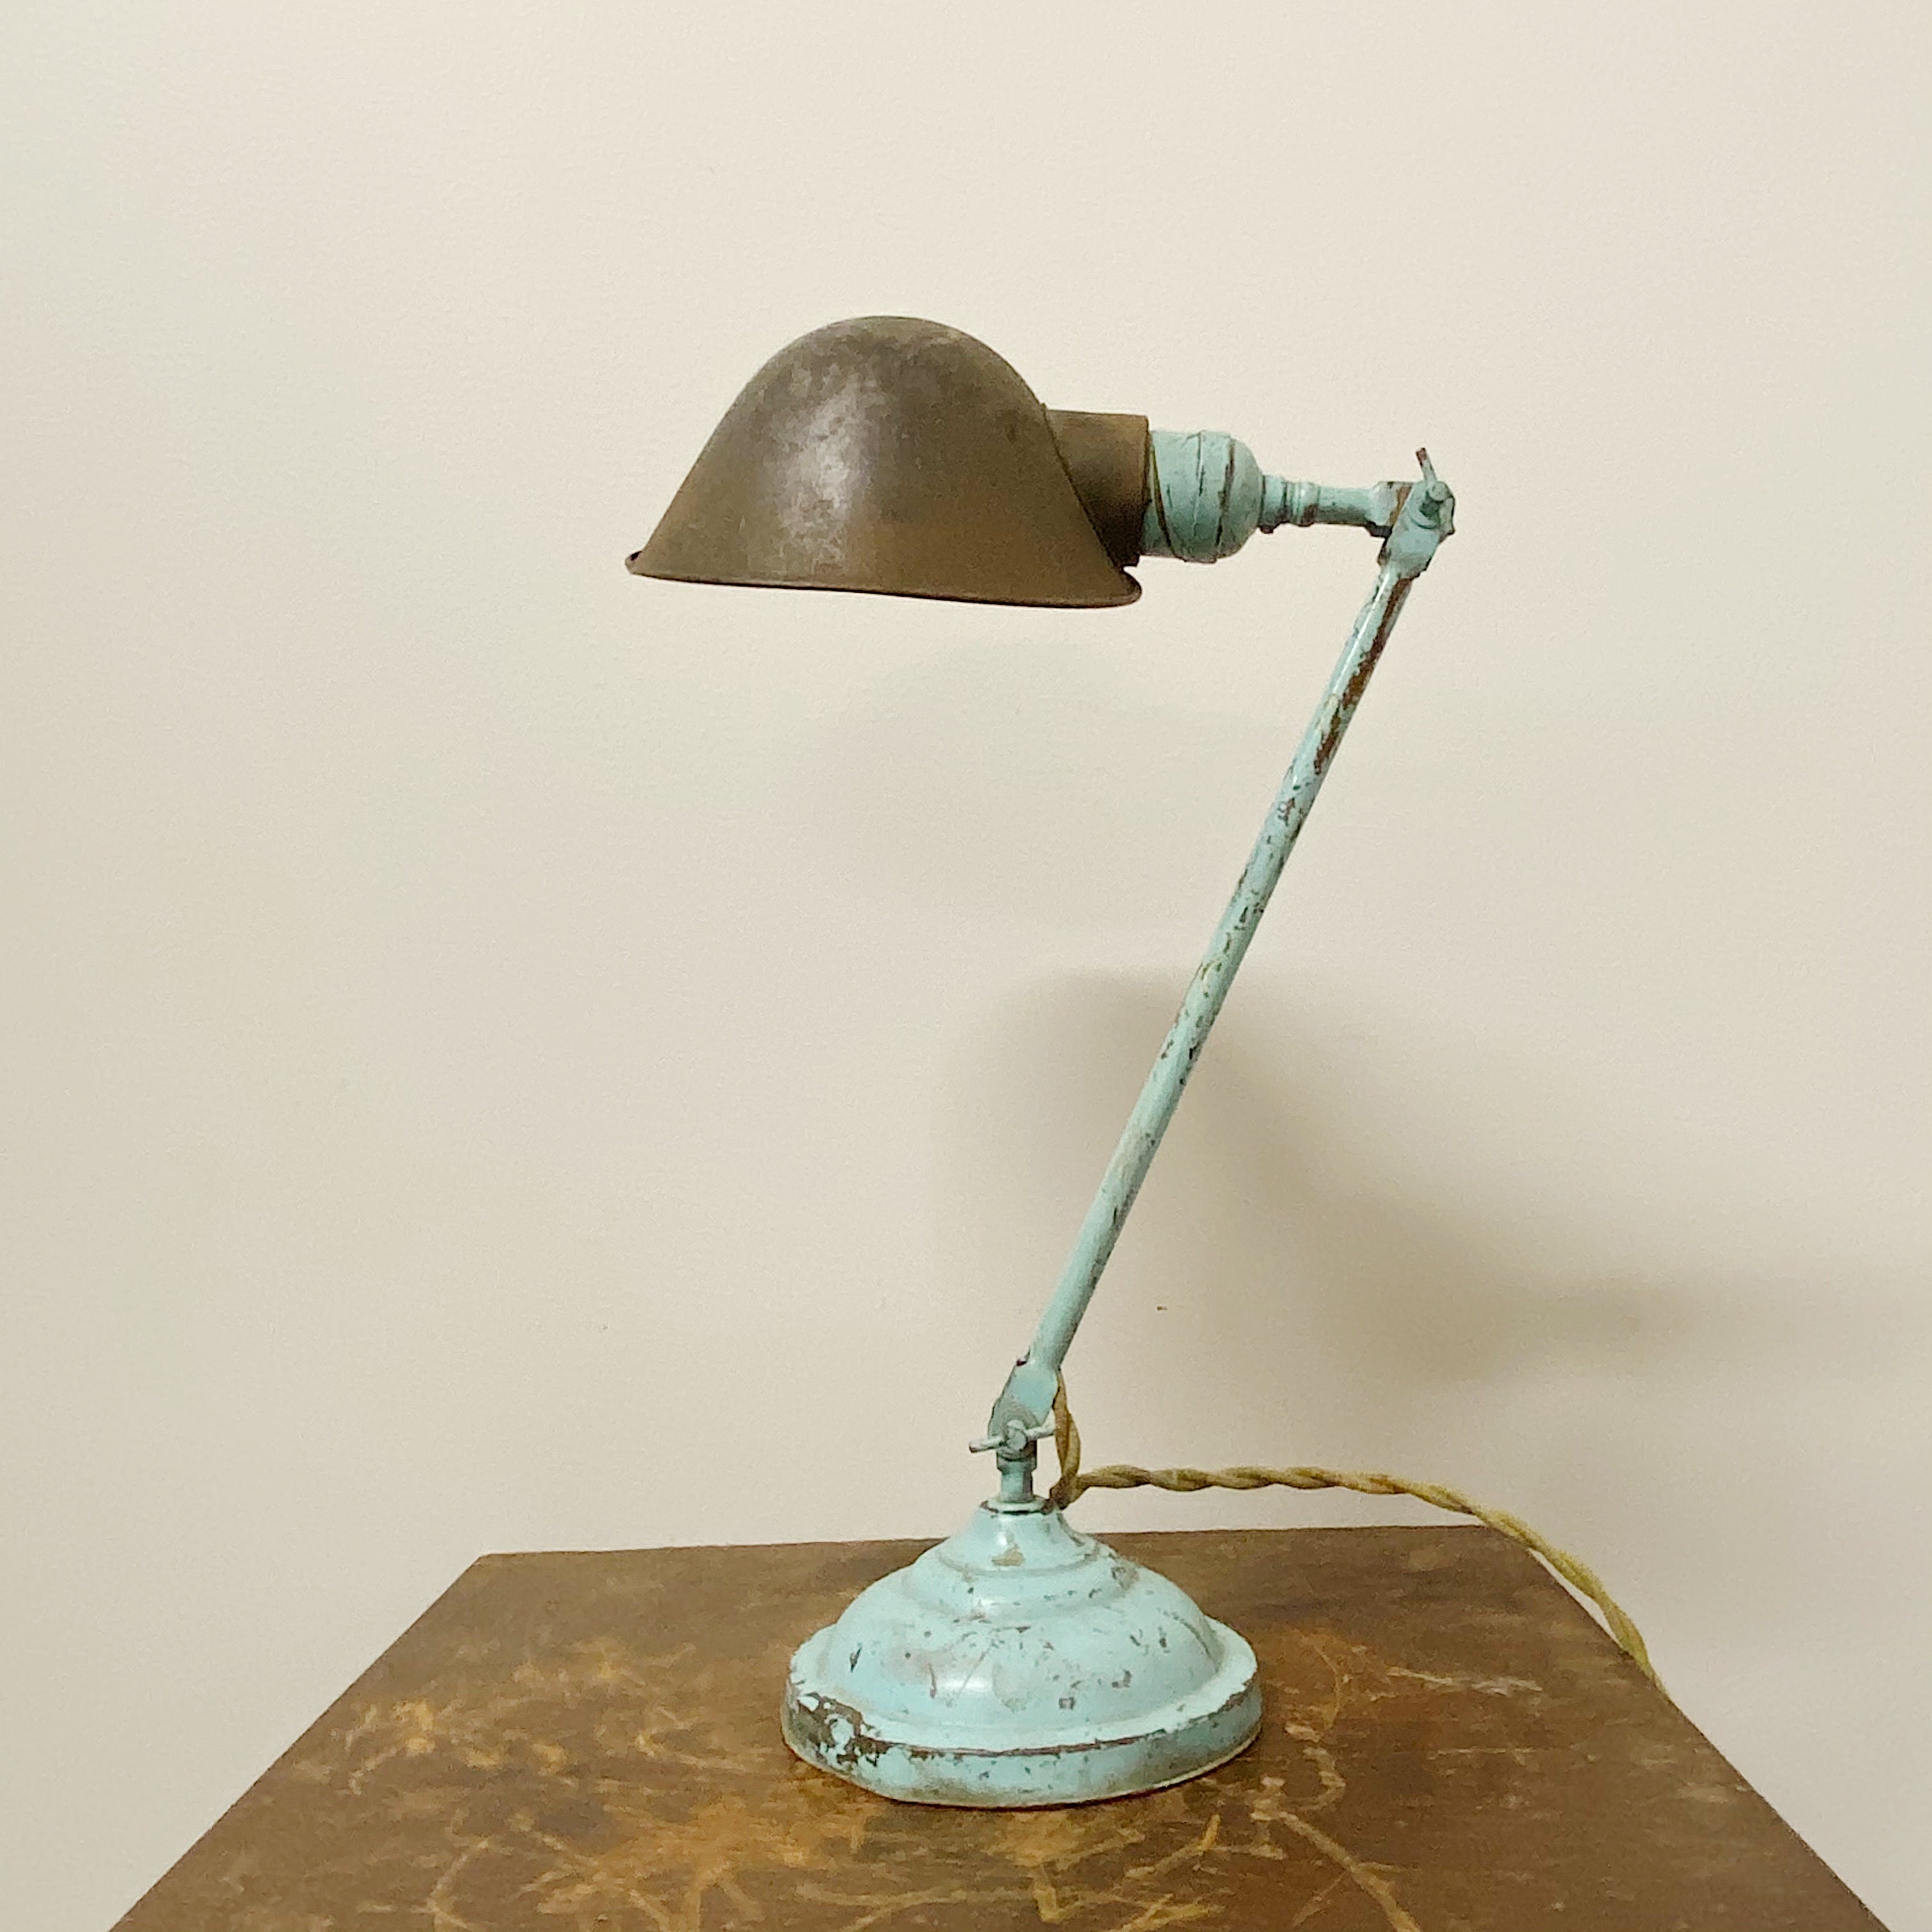 Faries Articulating Lamp with Light Blue Base - Early 1900s Industrial Table Light - Rare Antique Telescoping Desk Lamp - Cool Lamps